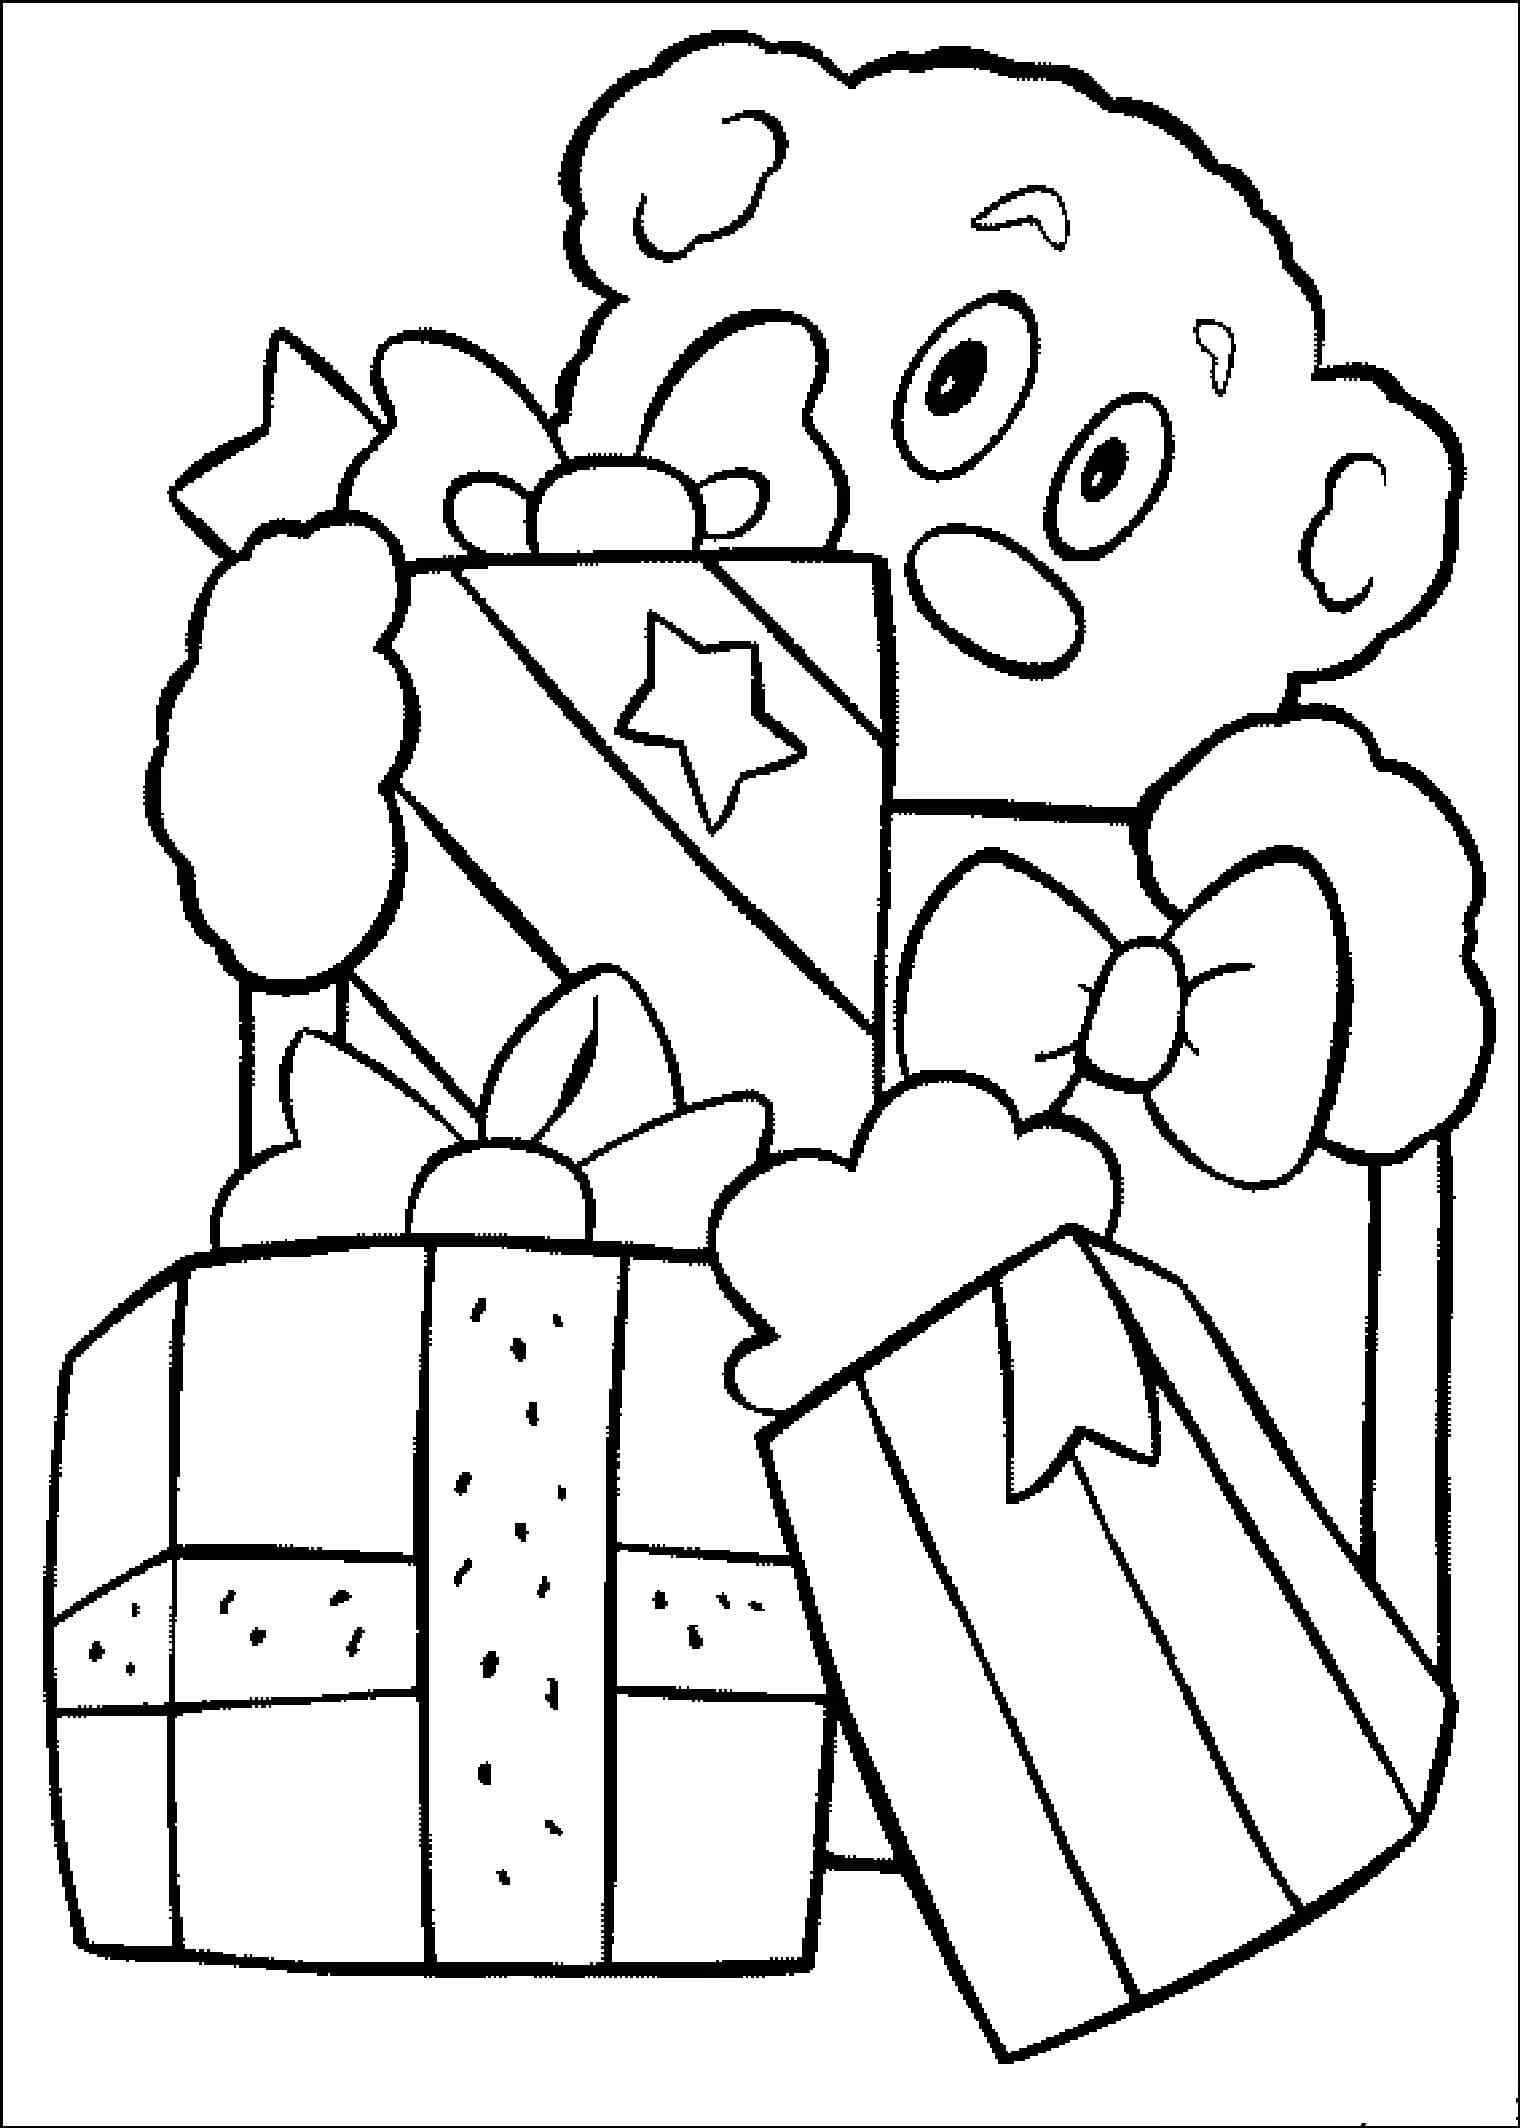 These Christmas Gift Coloring Page